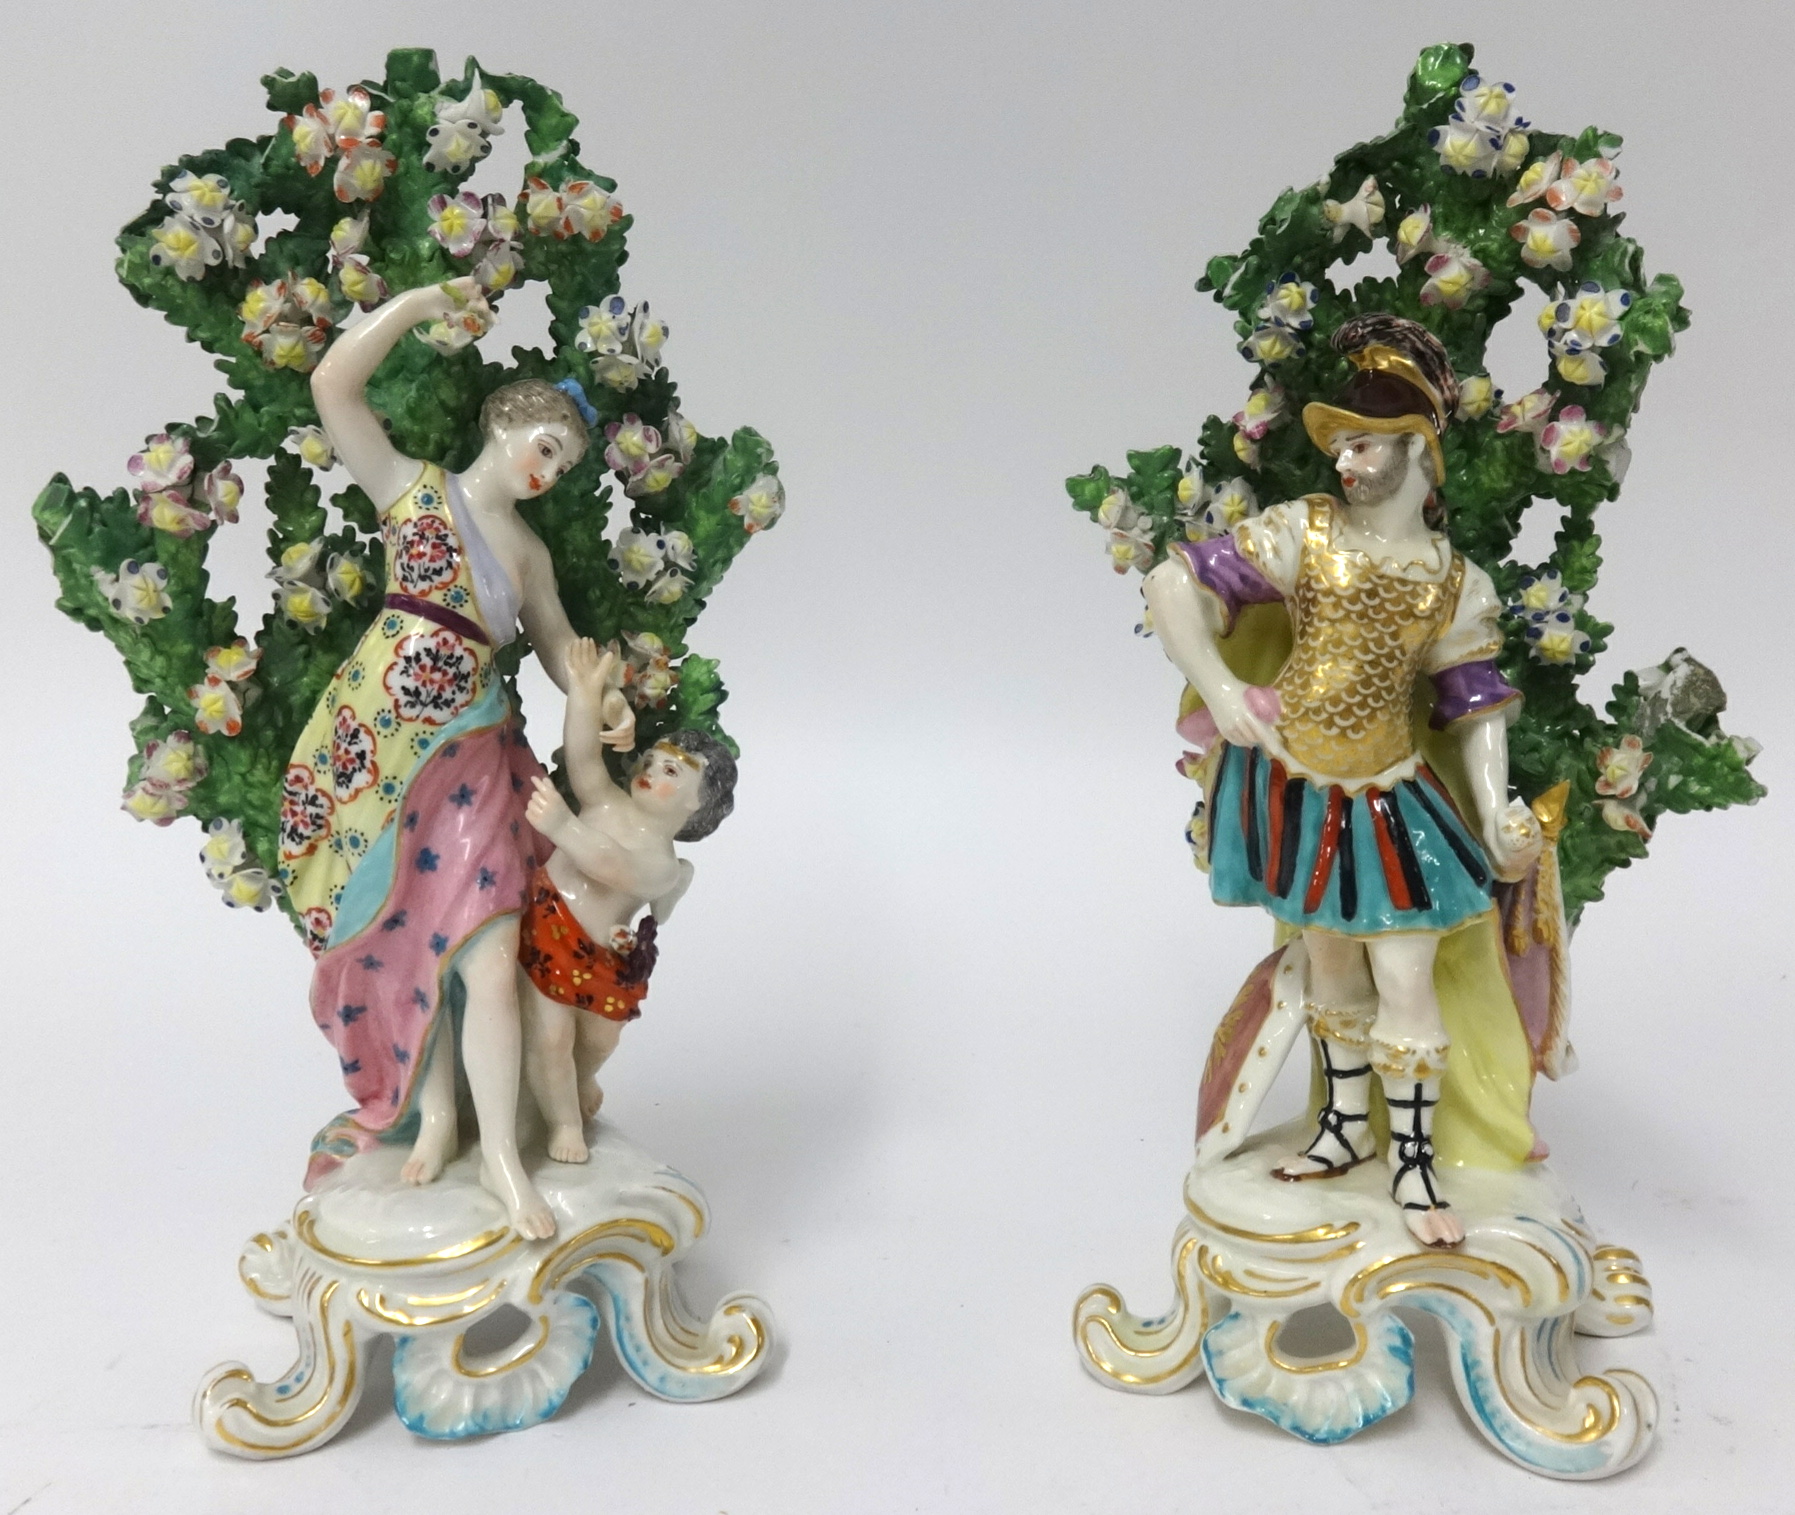 Pair of porcelain figurative groups with bocage depicting a mother and a winged putti and a